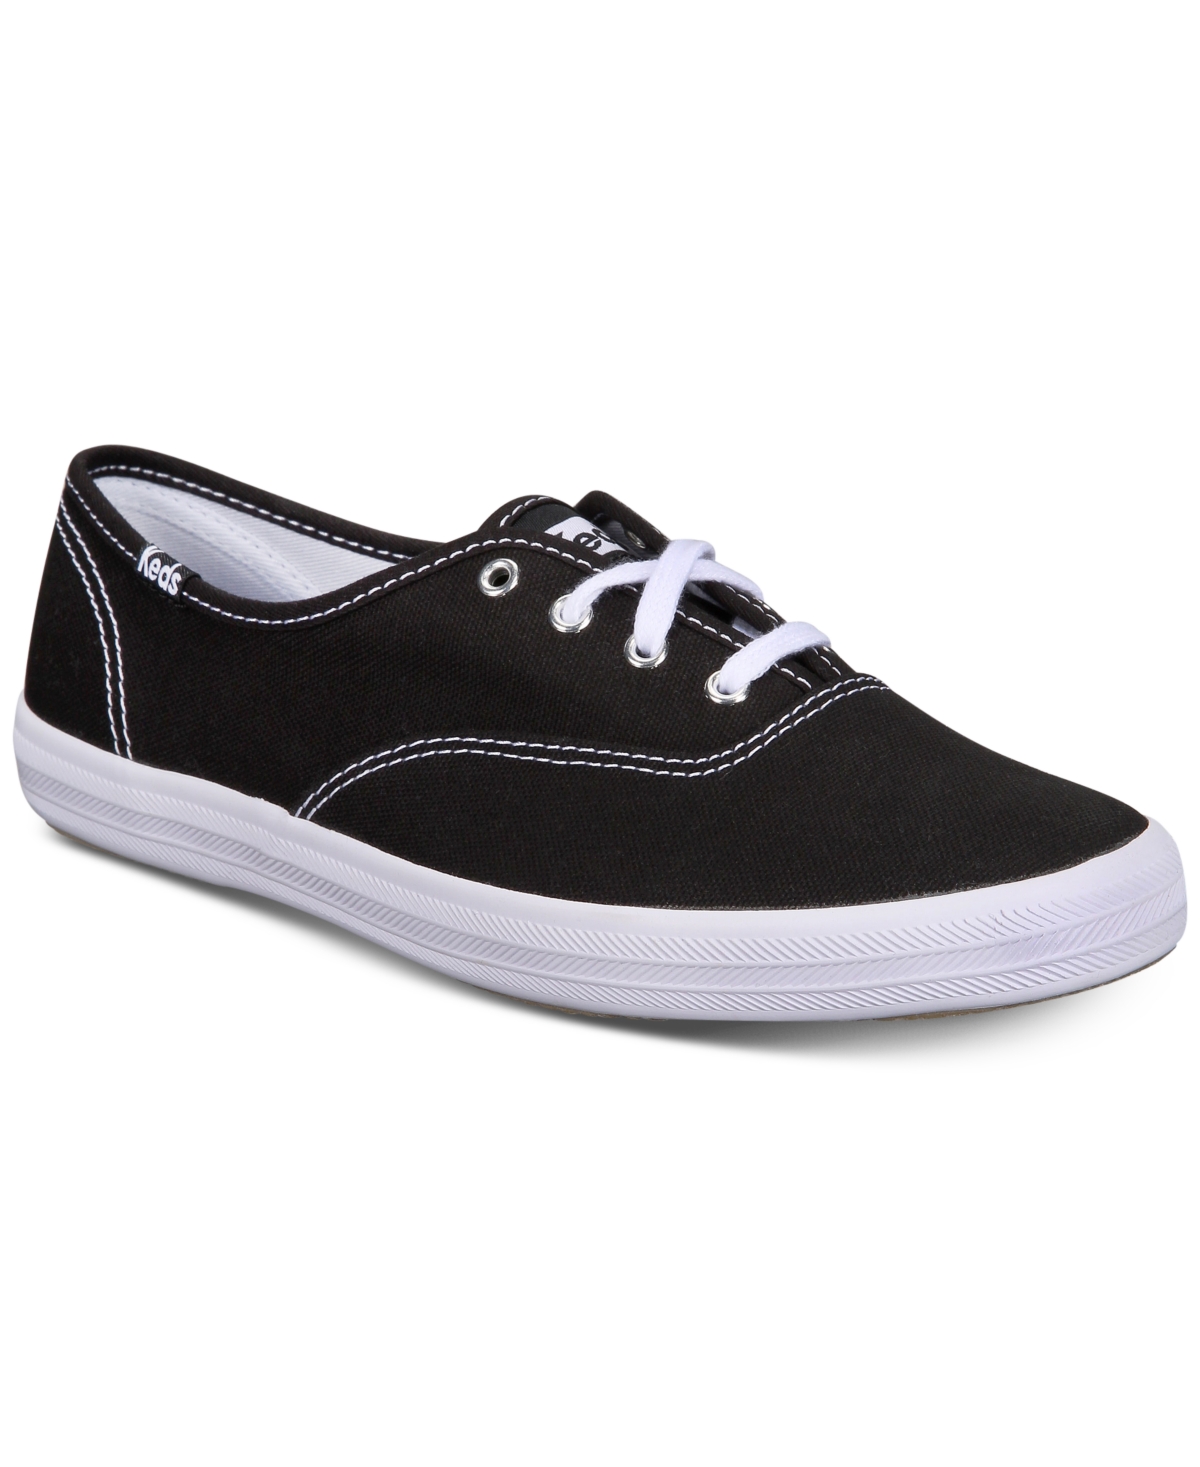 UPC 044209485664 product image for Keds Women's Champion Ortholite Lace-Up Oxford Fashion Sneakers from Finish Line | upcitemdb.com